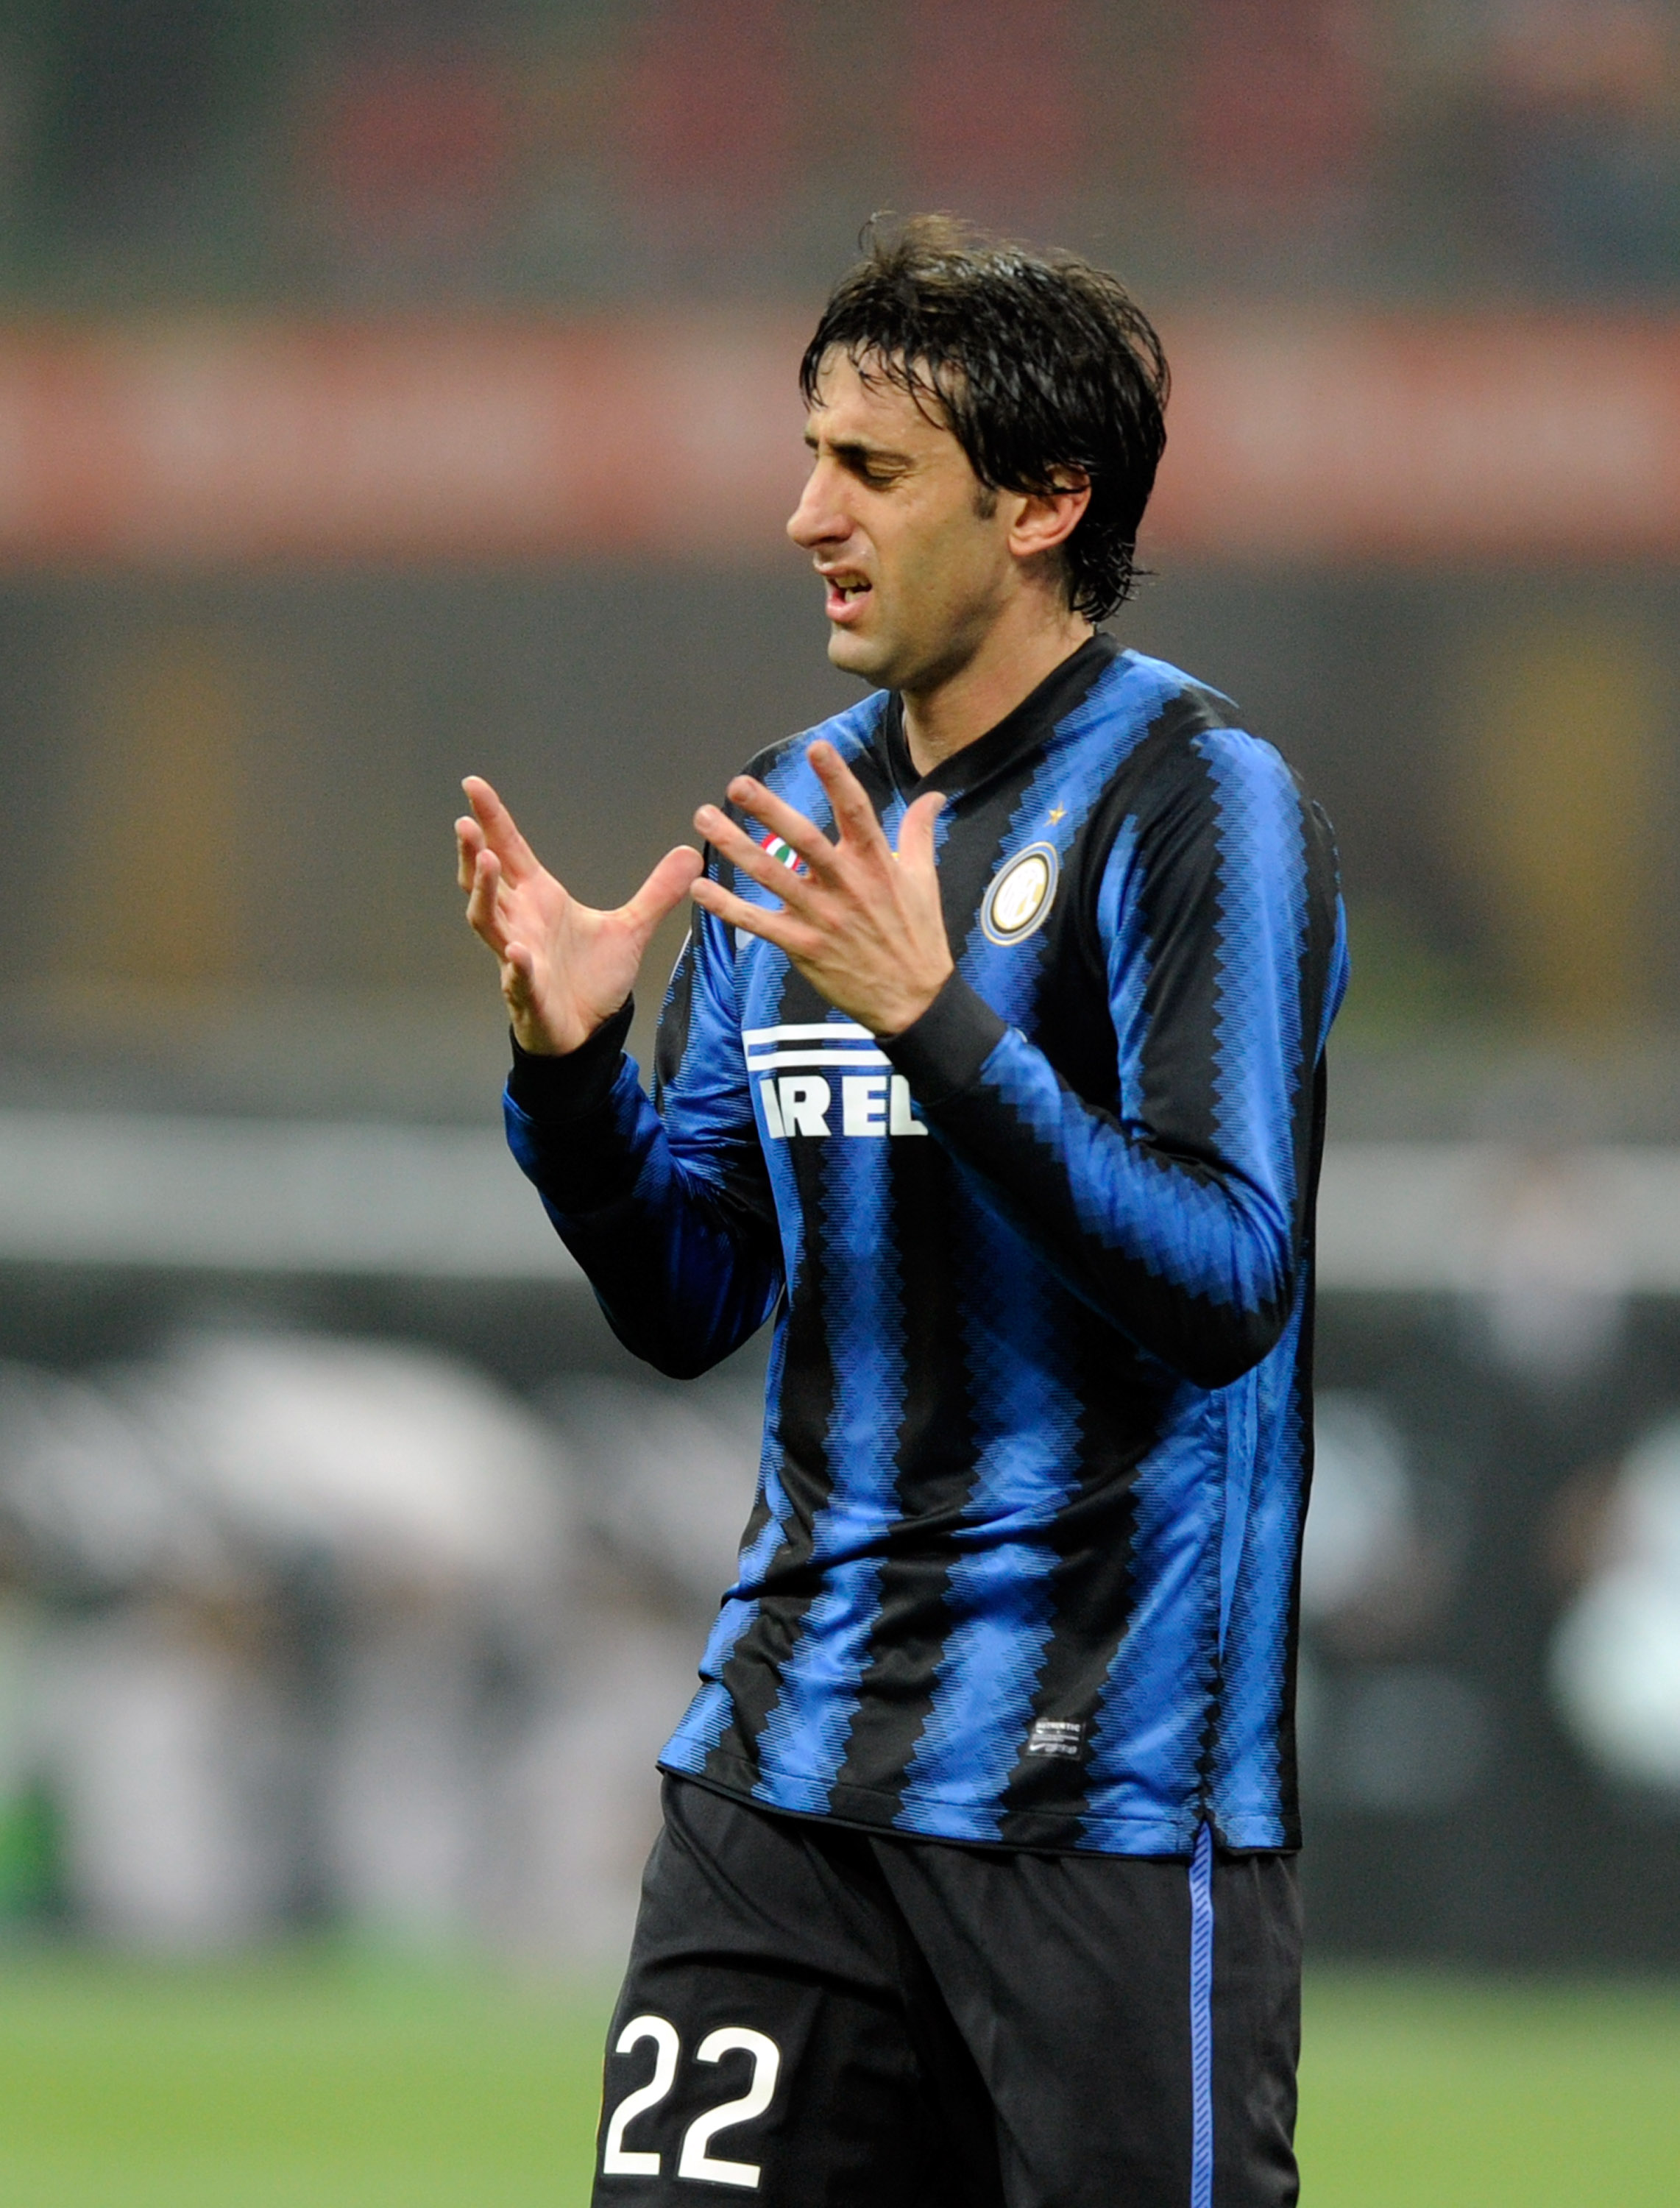 MILAN, ITALY - NOVEMBER 06:  Diego Milito of FC Internazionale Milano reacts during the Serie A match between Inter and Brescia at Stadio Giuseppe Meazza on November 6, 2010 in Milan, Italy.  (Photo by Claudio Villa/Getty Images)